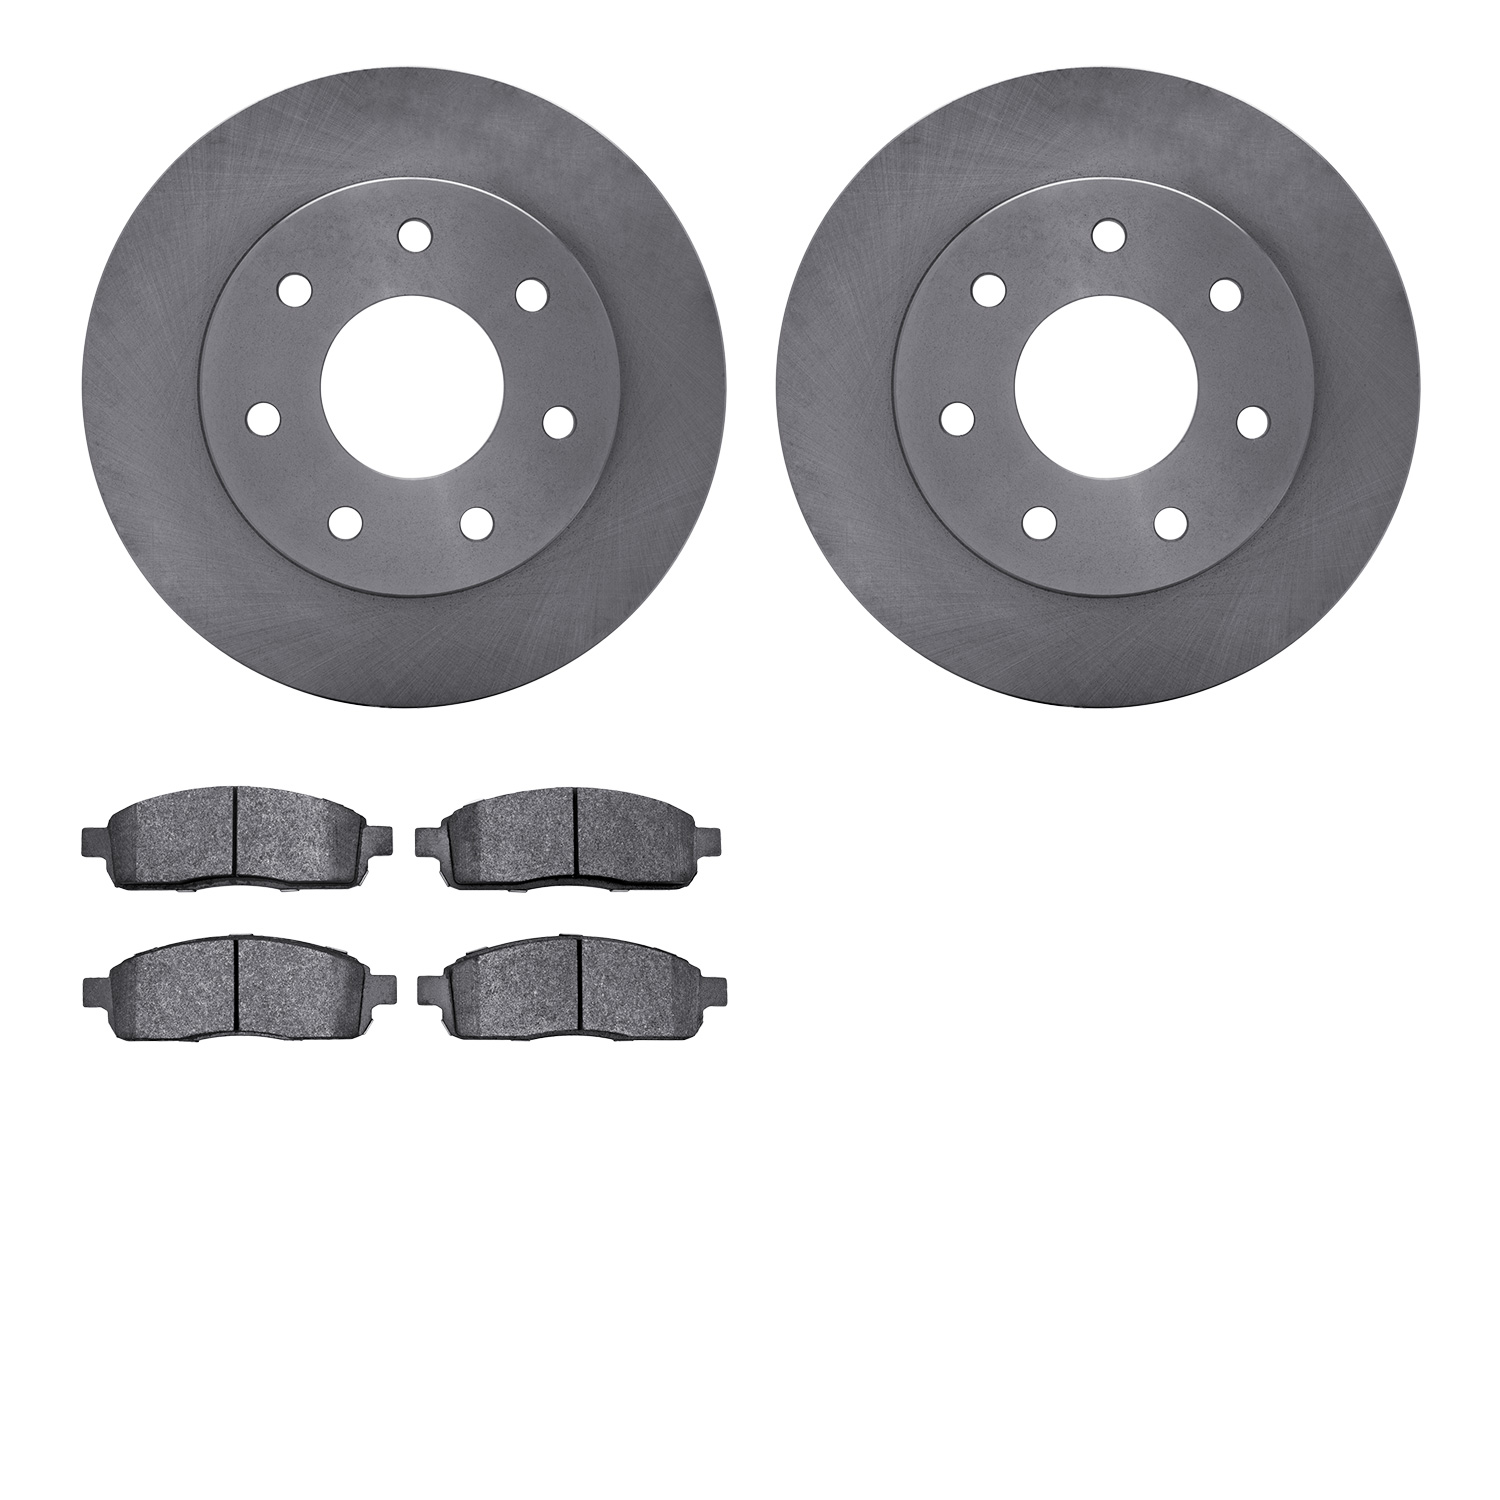 6402-54215 Brake Rotors with Ultimate-Duty Brake Pads, 2004-2008 Ford/Lincoln/Mercury/Mazda, Position: Front